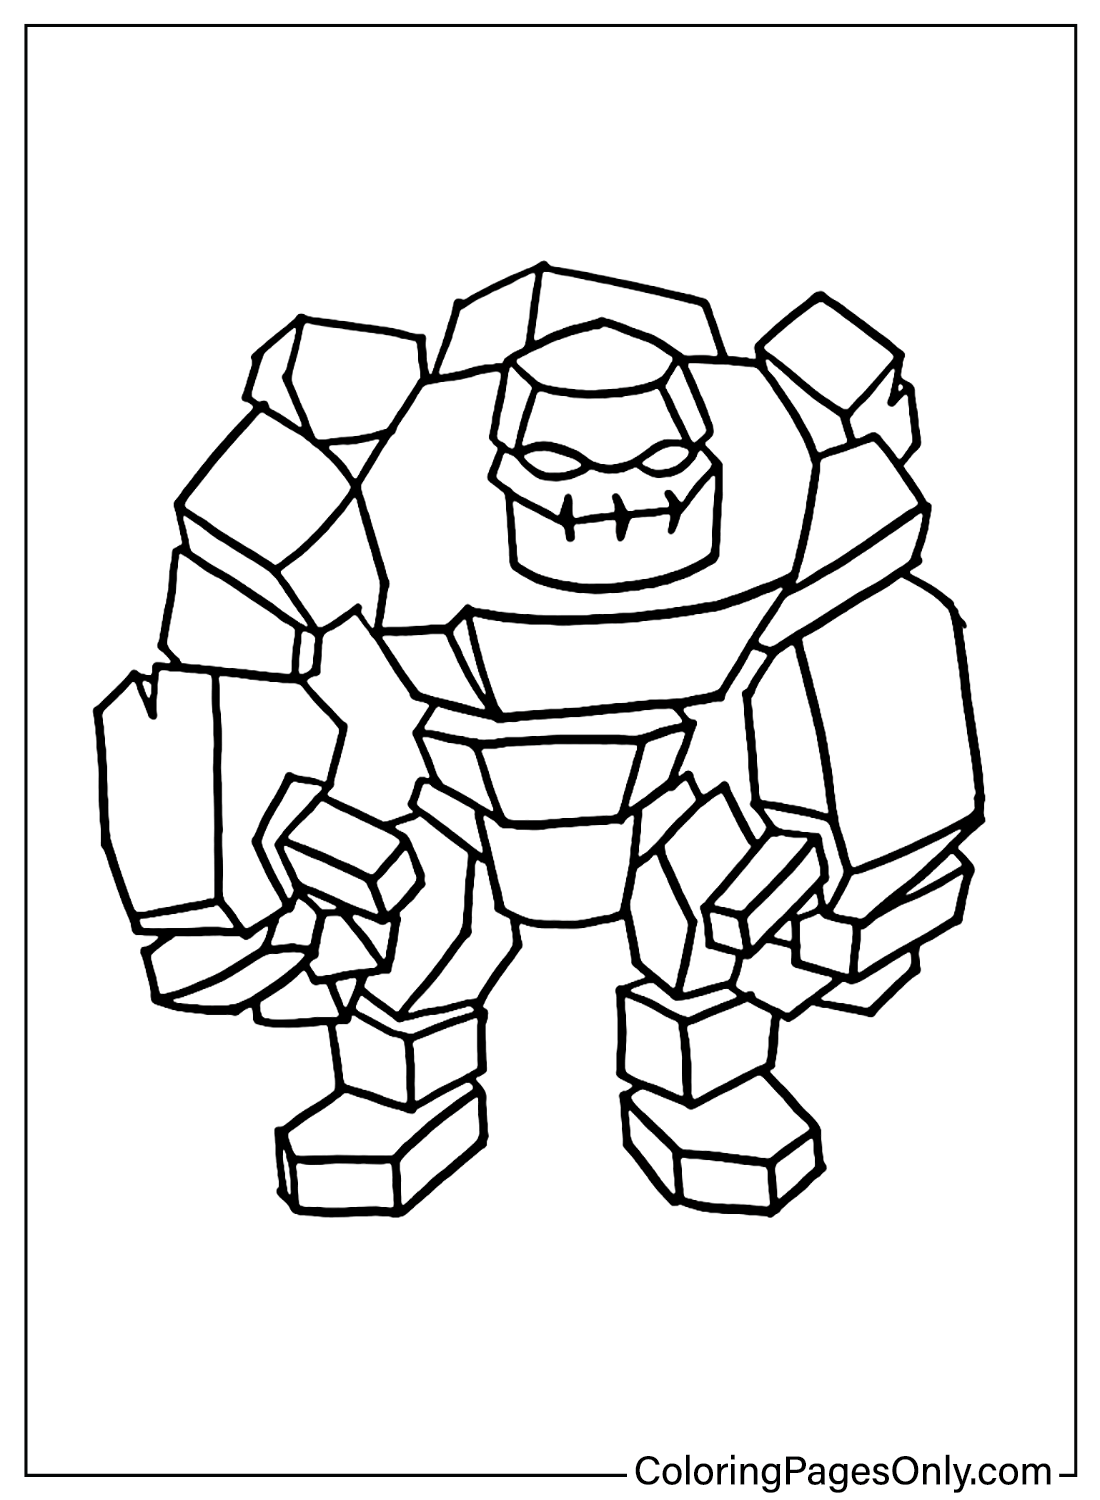 Clash of Clans Golem Coloring Pages from Clash of Clans